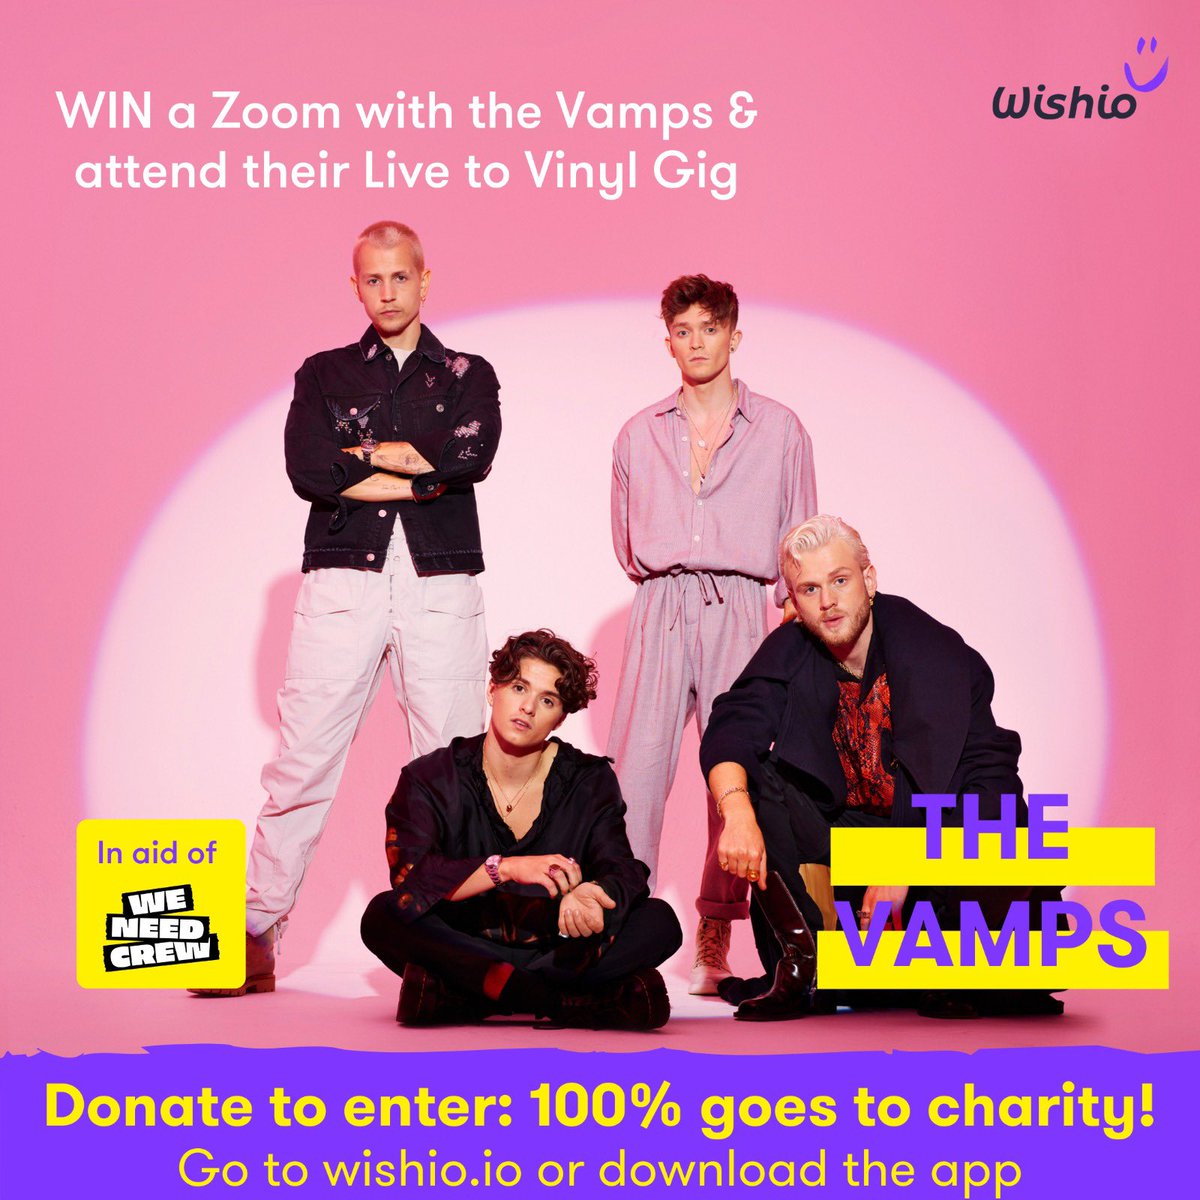 You can enter with a chance to win tickets to our Live to Vinyl experience on 16th December along with some merch & a zoom call with us, on Wishio. All of the money raised via @getwishio will be going to the @weneedcrew charity. To enter, donate here wishio.io/events/thevamps 🌸